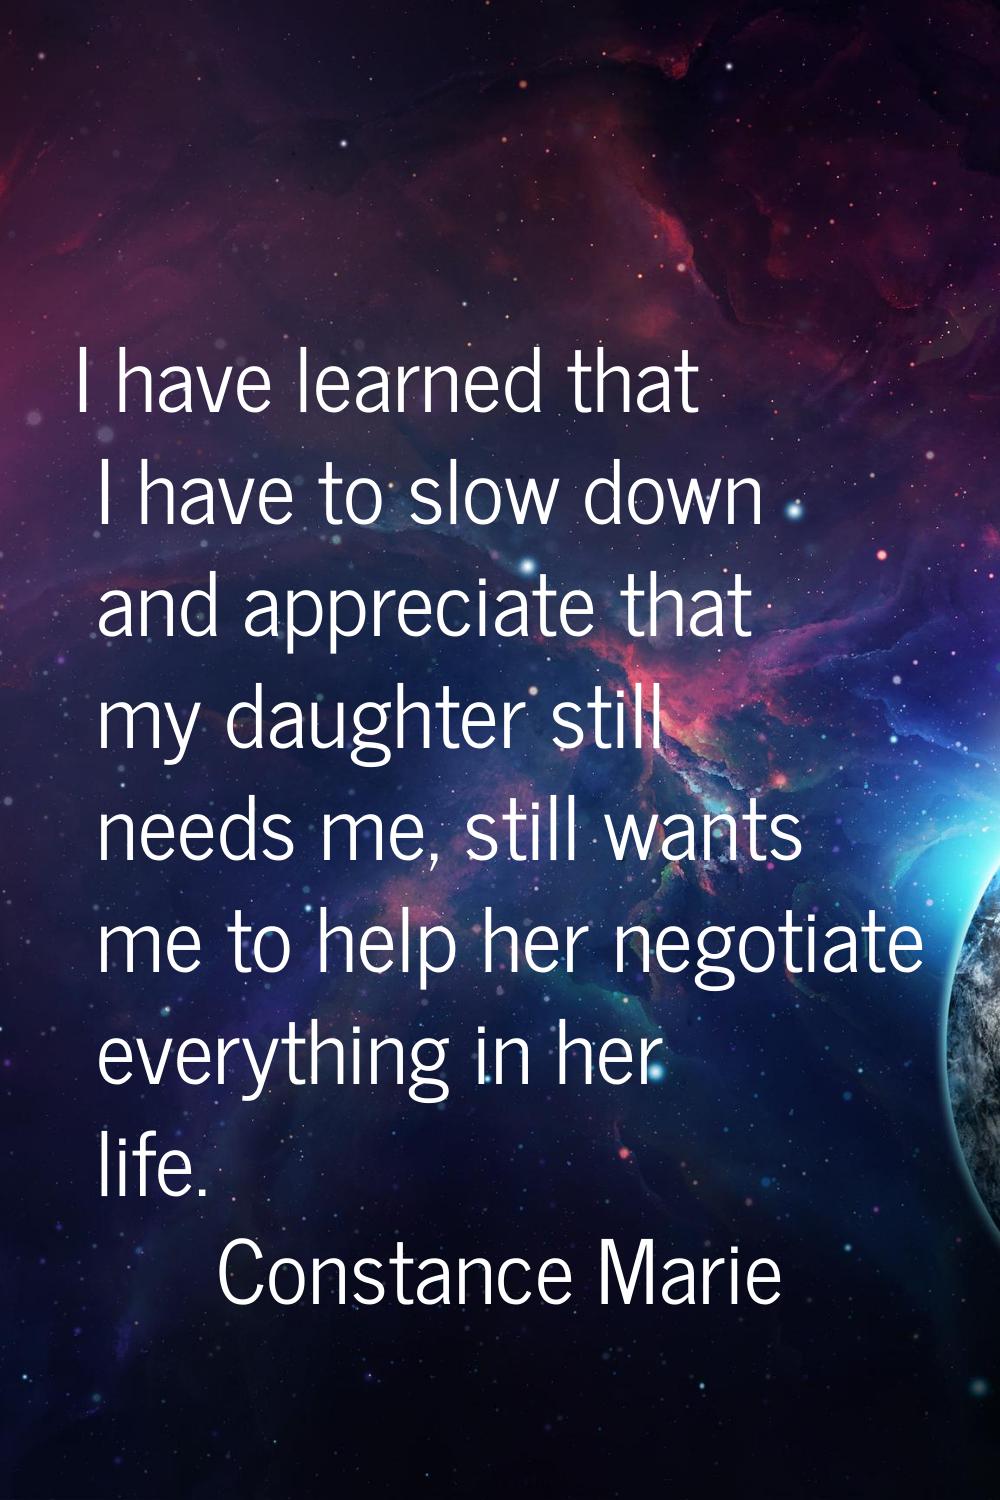 I have learned that I have to slow down and appreciate that my daughter still needs me, still wants